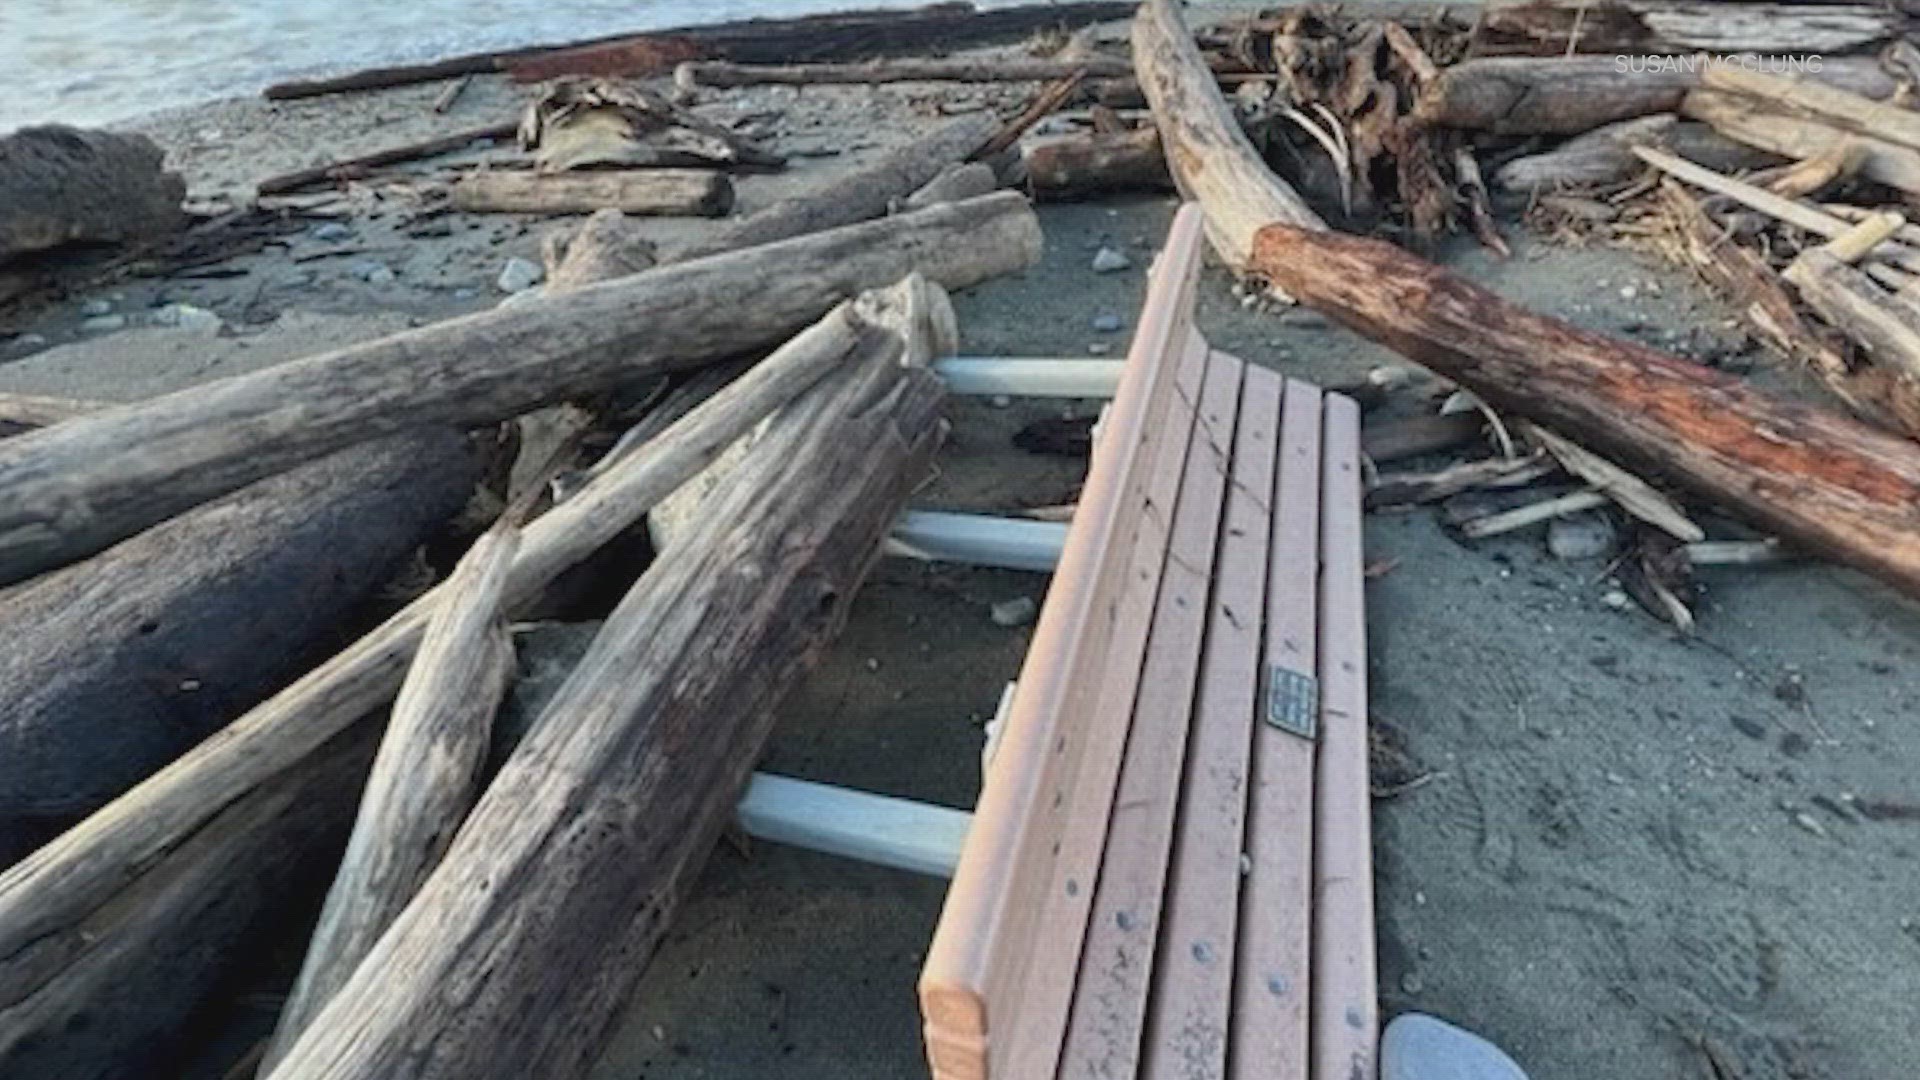 Washington State Parks has closed the West Beach area and strongly encourages the public to stay out of the closed areas for their safety.